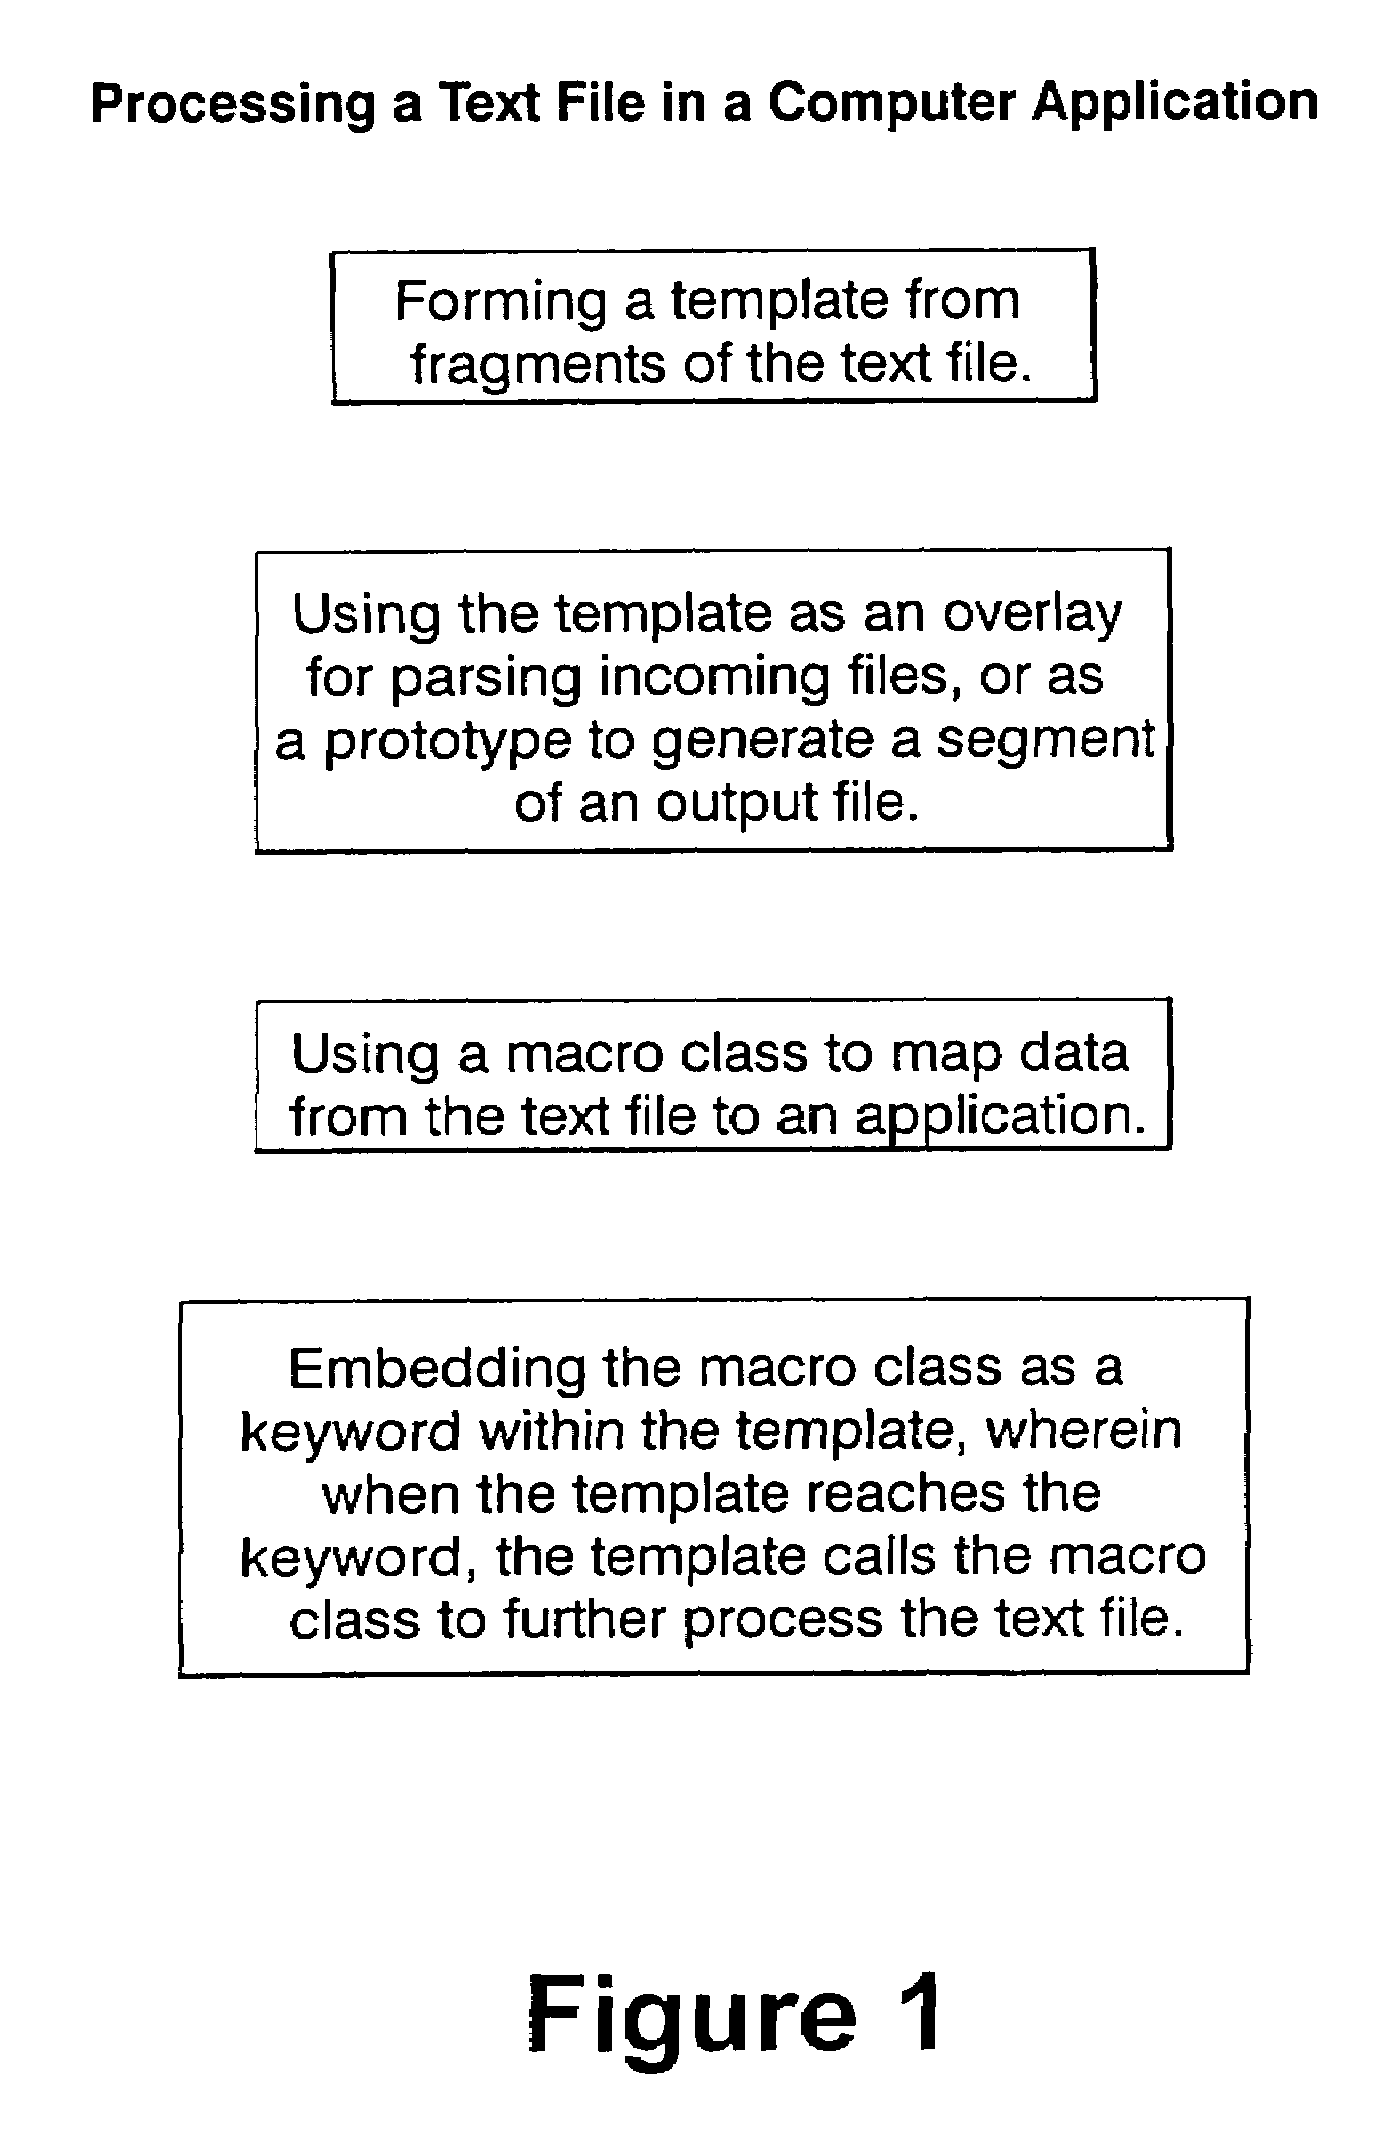 Text file interface support in an object oriented application